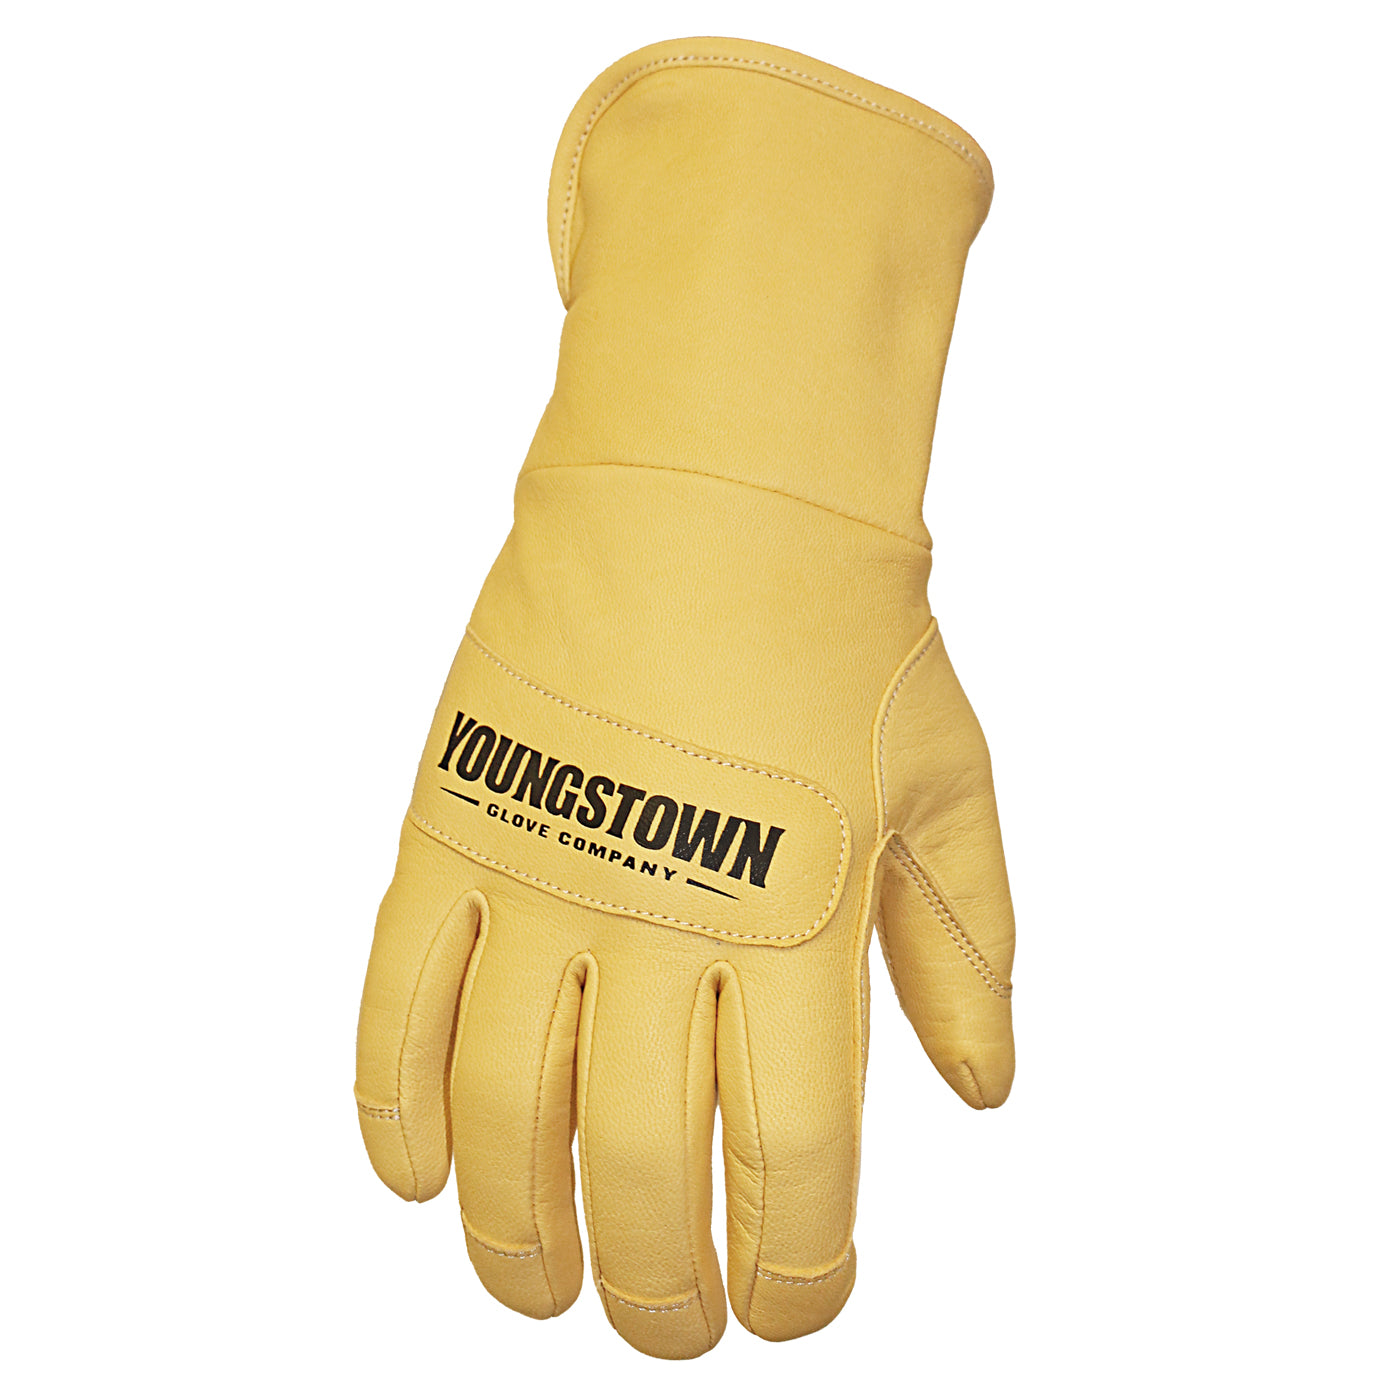 11-3245-60 Youngstown Leather Utility Plus Glove - Main image